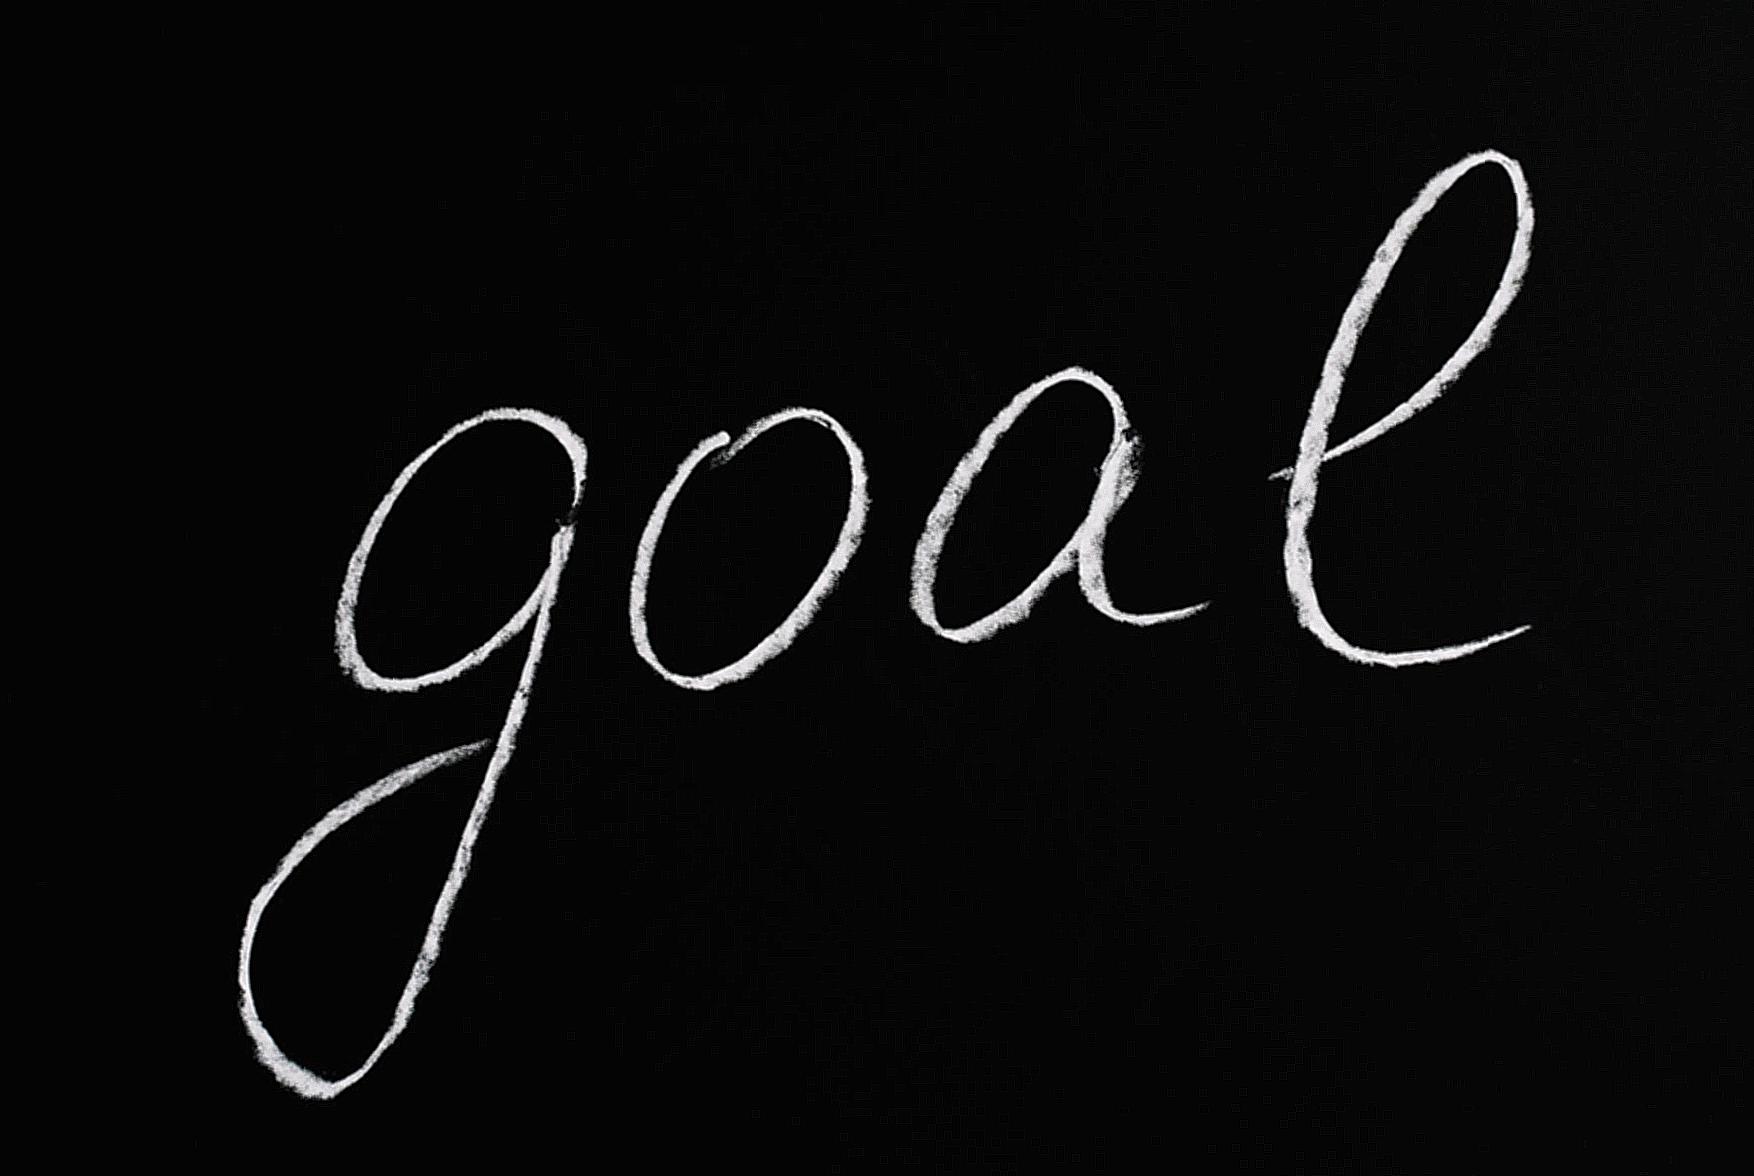 Goal Lettering Text on Black Background